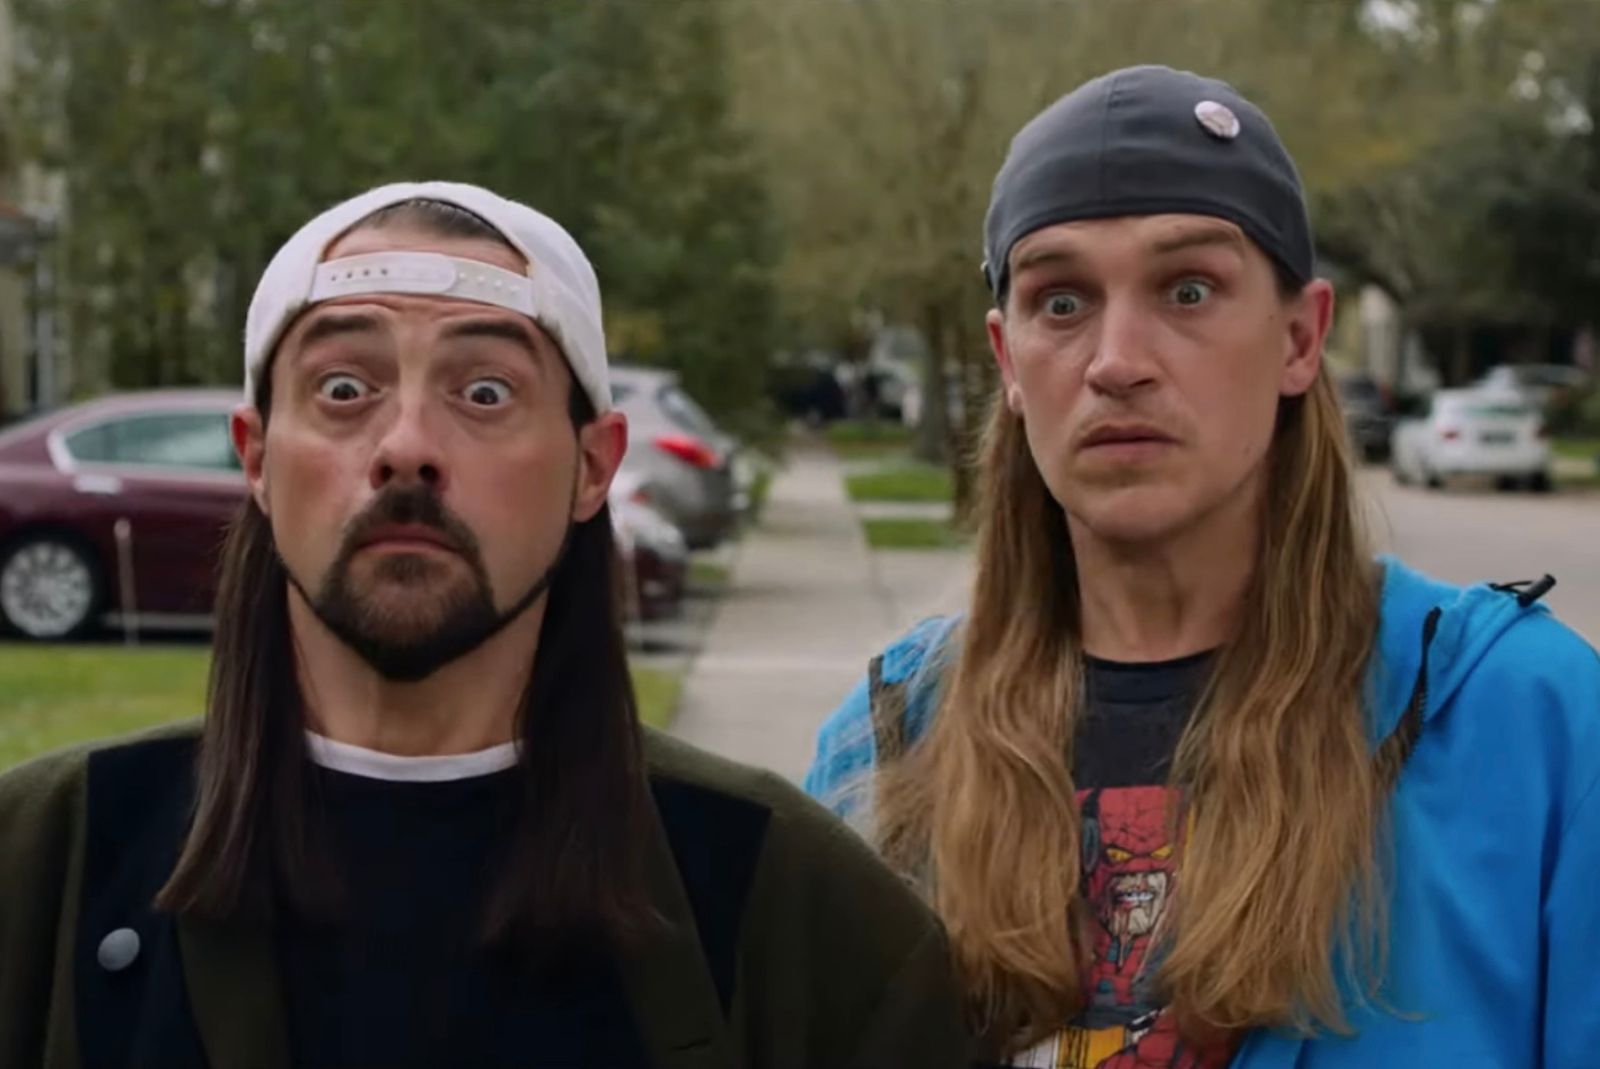 View Askewniverse movie order: Watch every Kevin Smith movie in chronological order photo 10